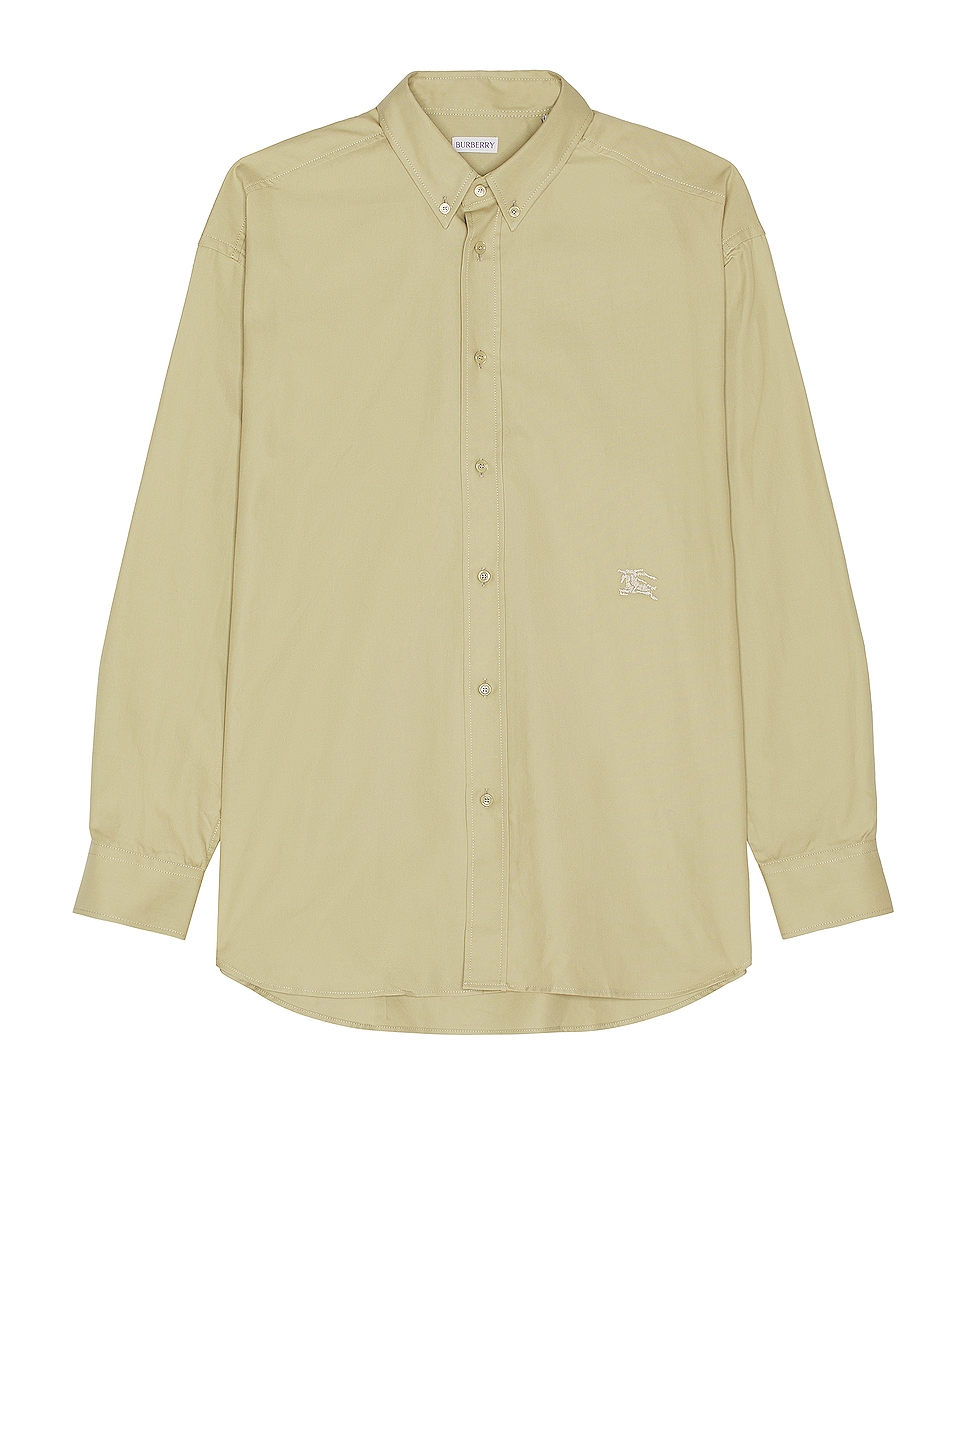 Image 1 of Burberry Long Sleeve Chest Pocket Shirt in Hunter